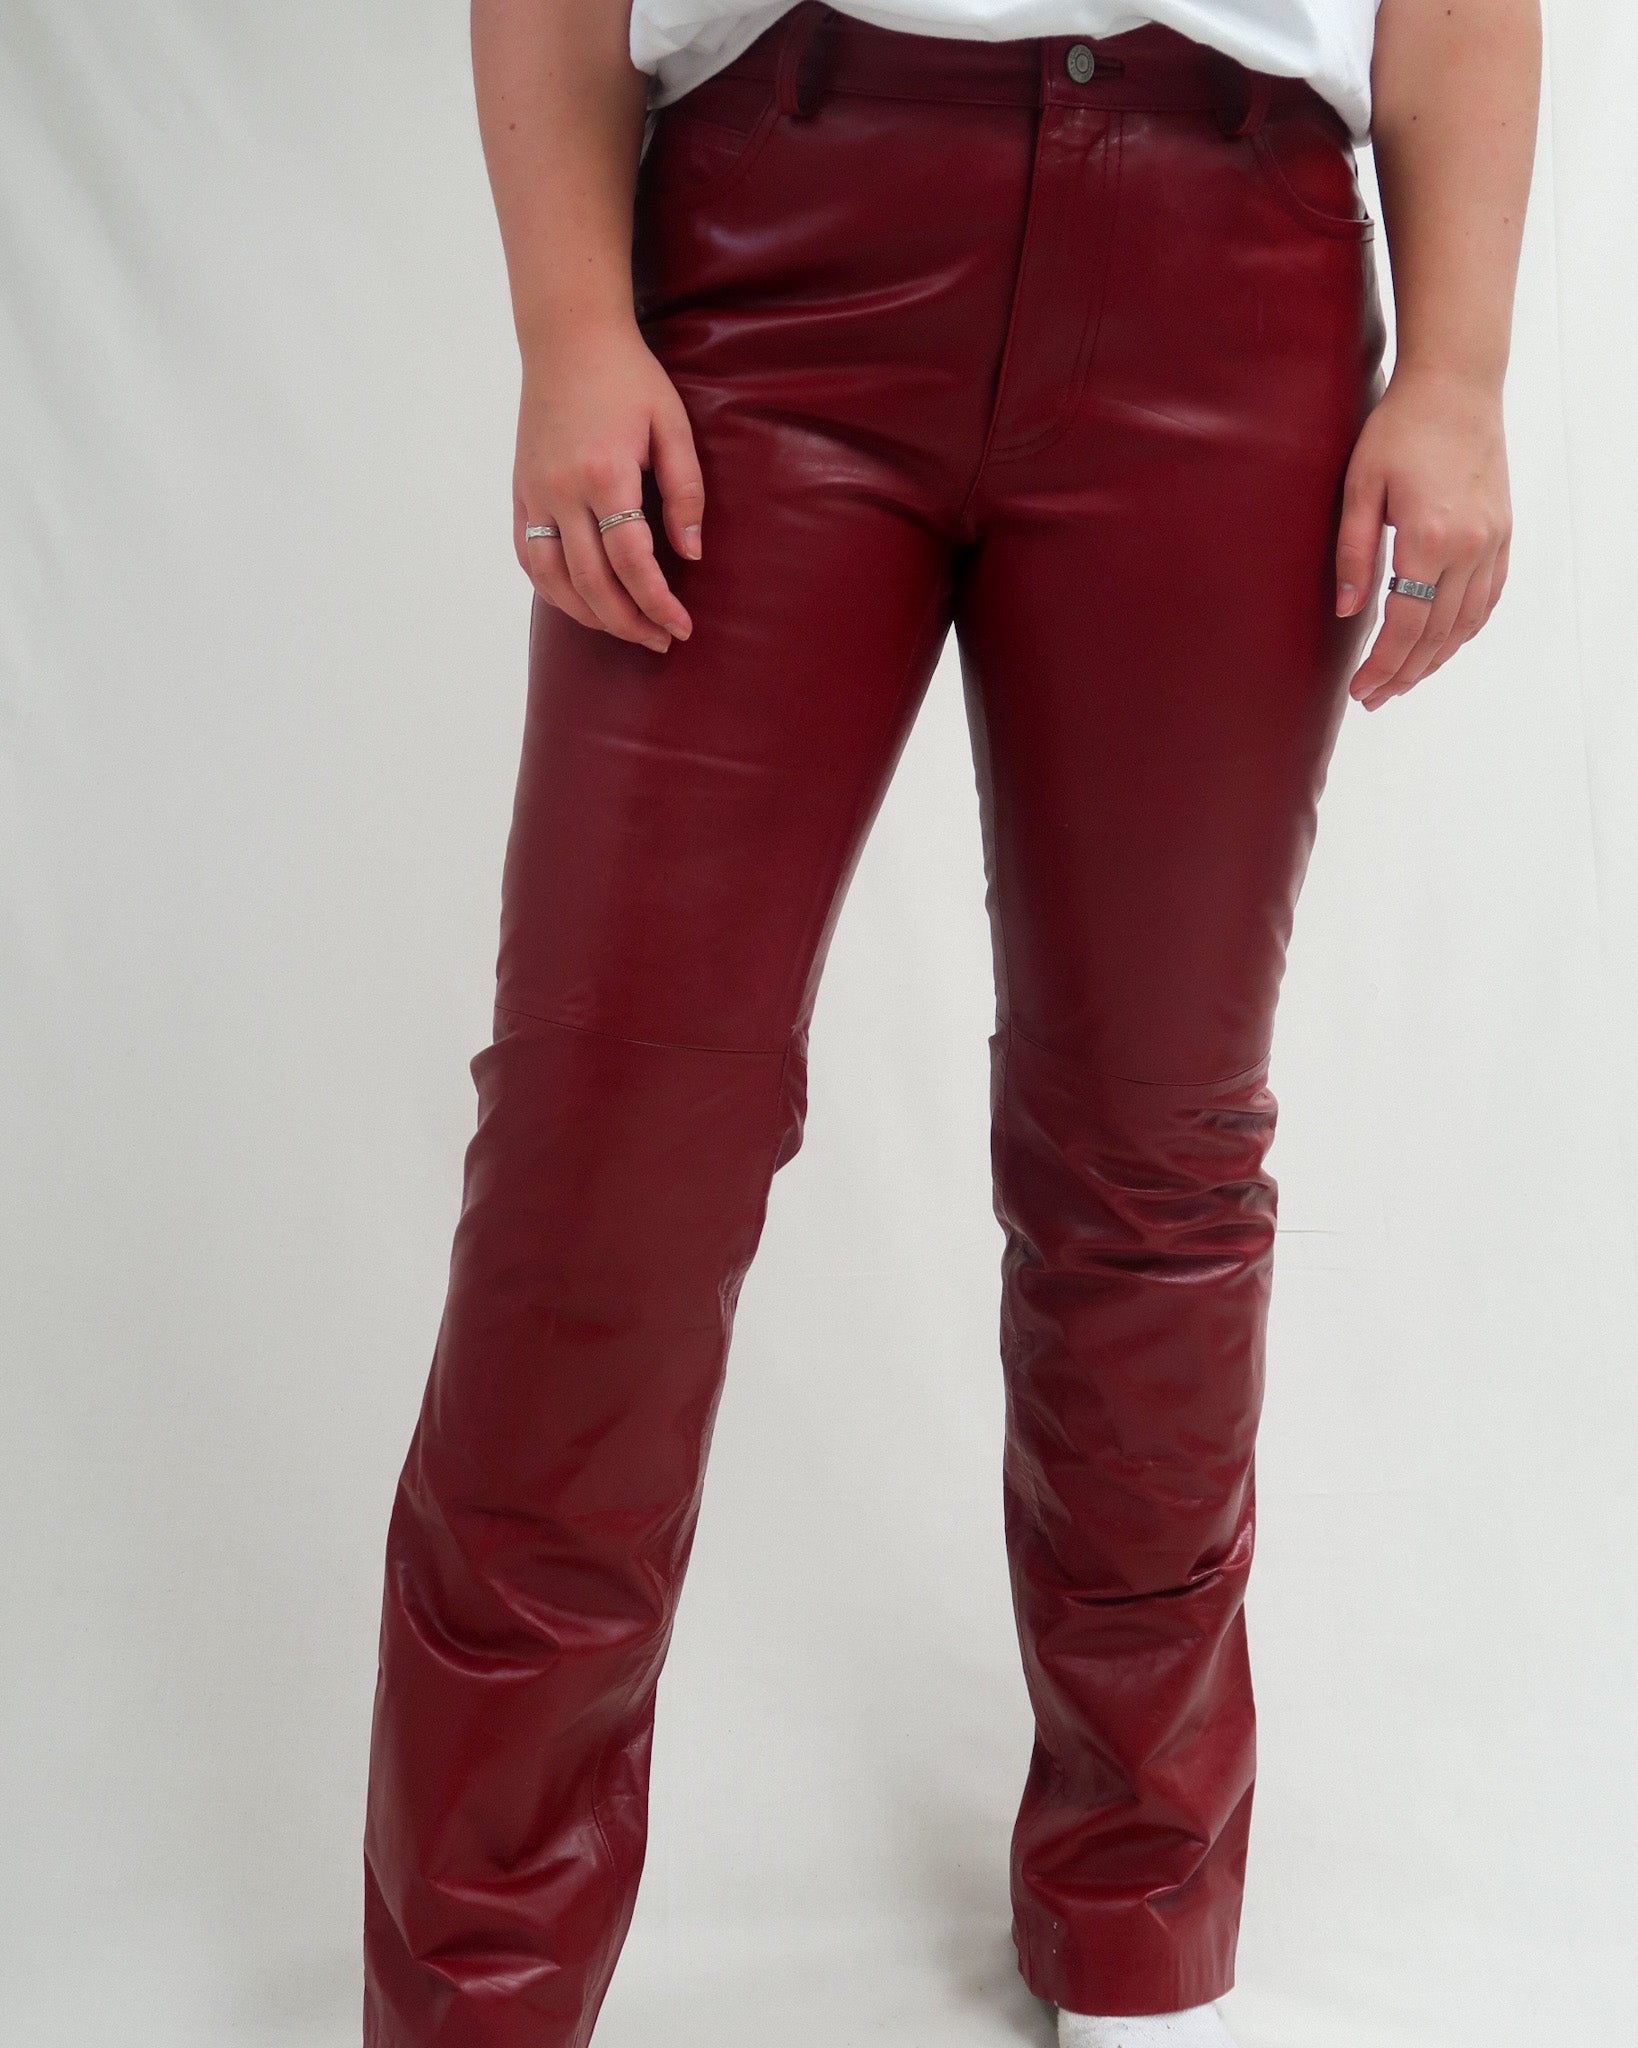 Red leather pants